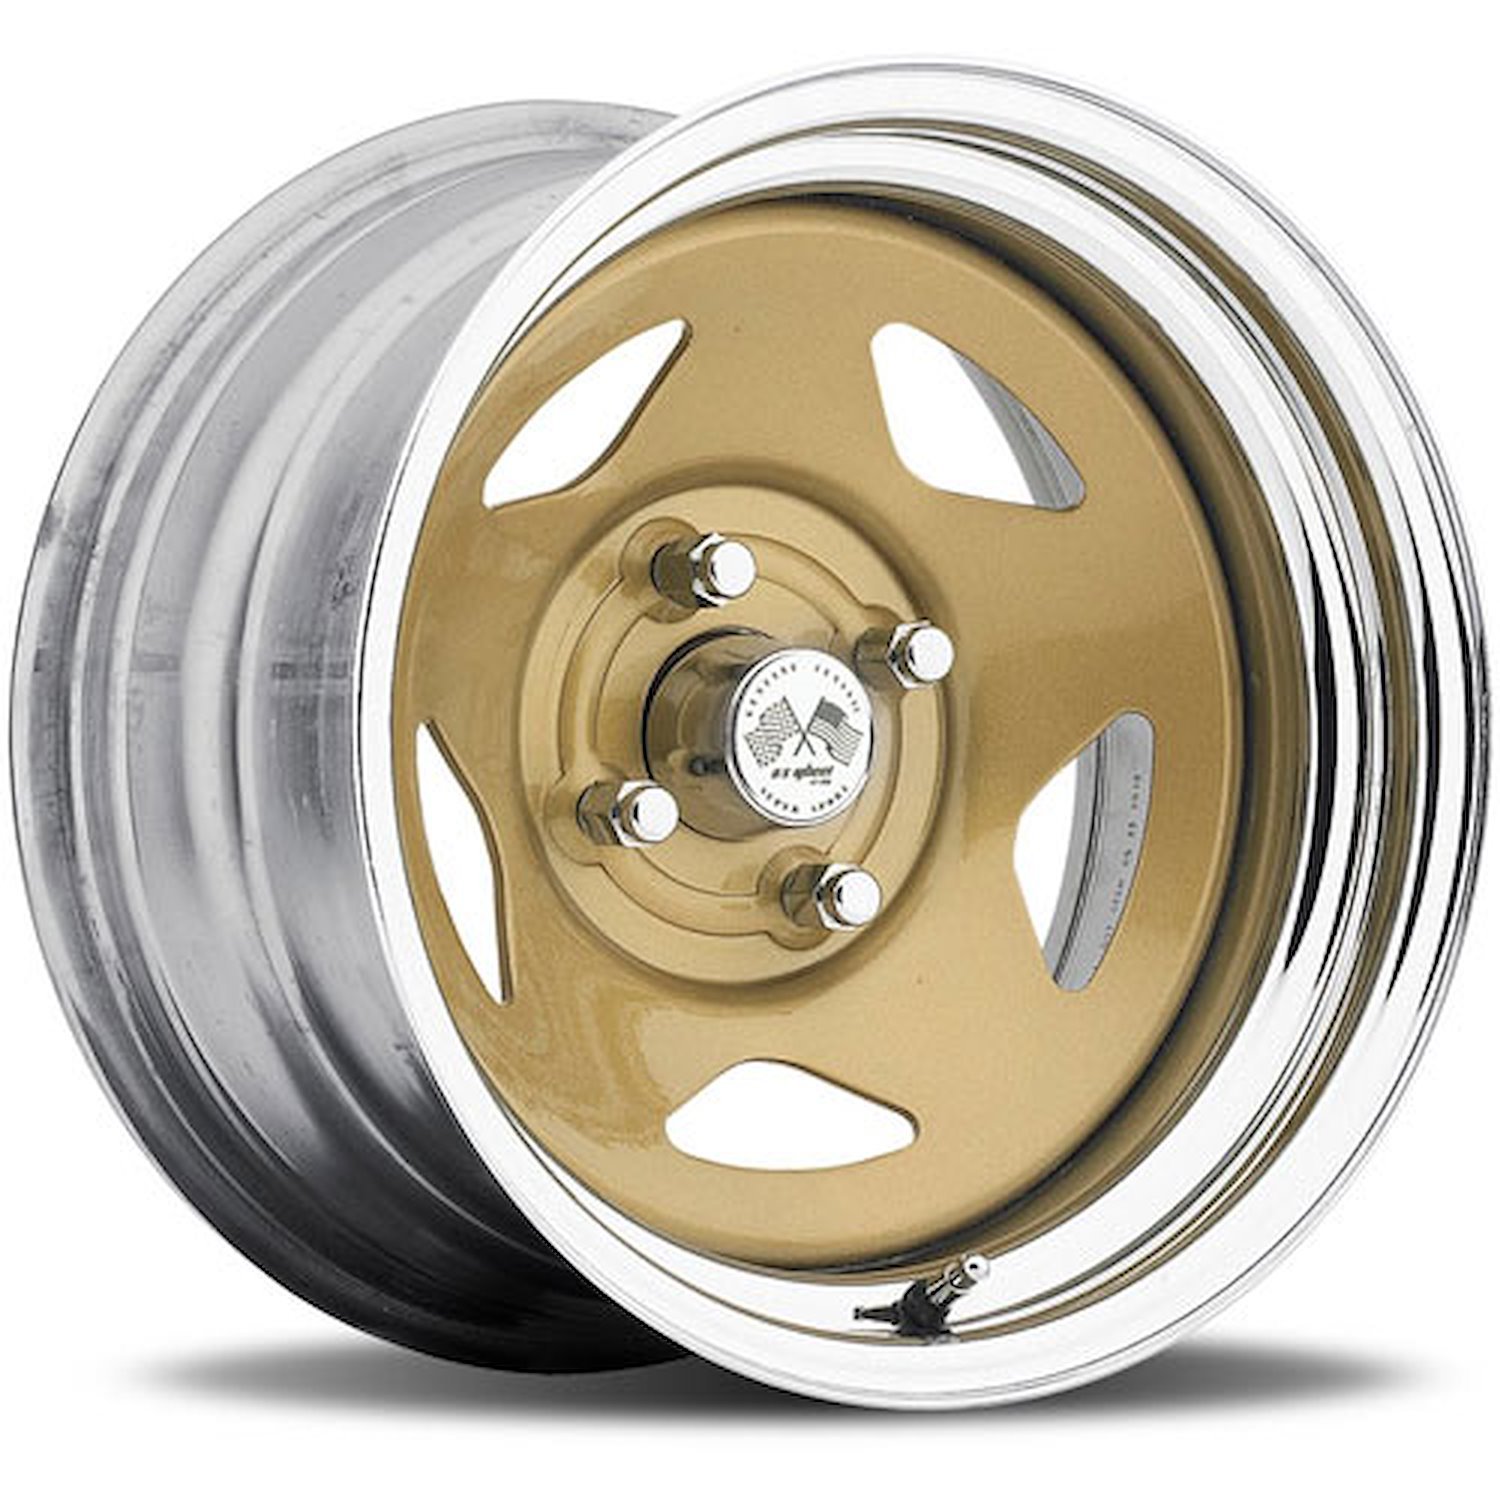 CHROME STAR FWD DRIFTER GOLD 15 x 8 5 x 45 Bolt Circle 5 Back Spacing +16 offset 266 Center Bore 1400 lbs Load Rating